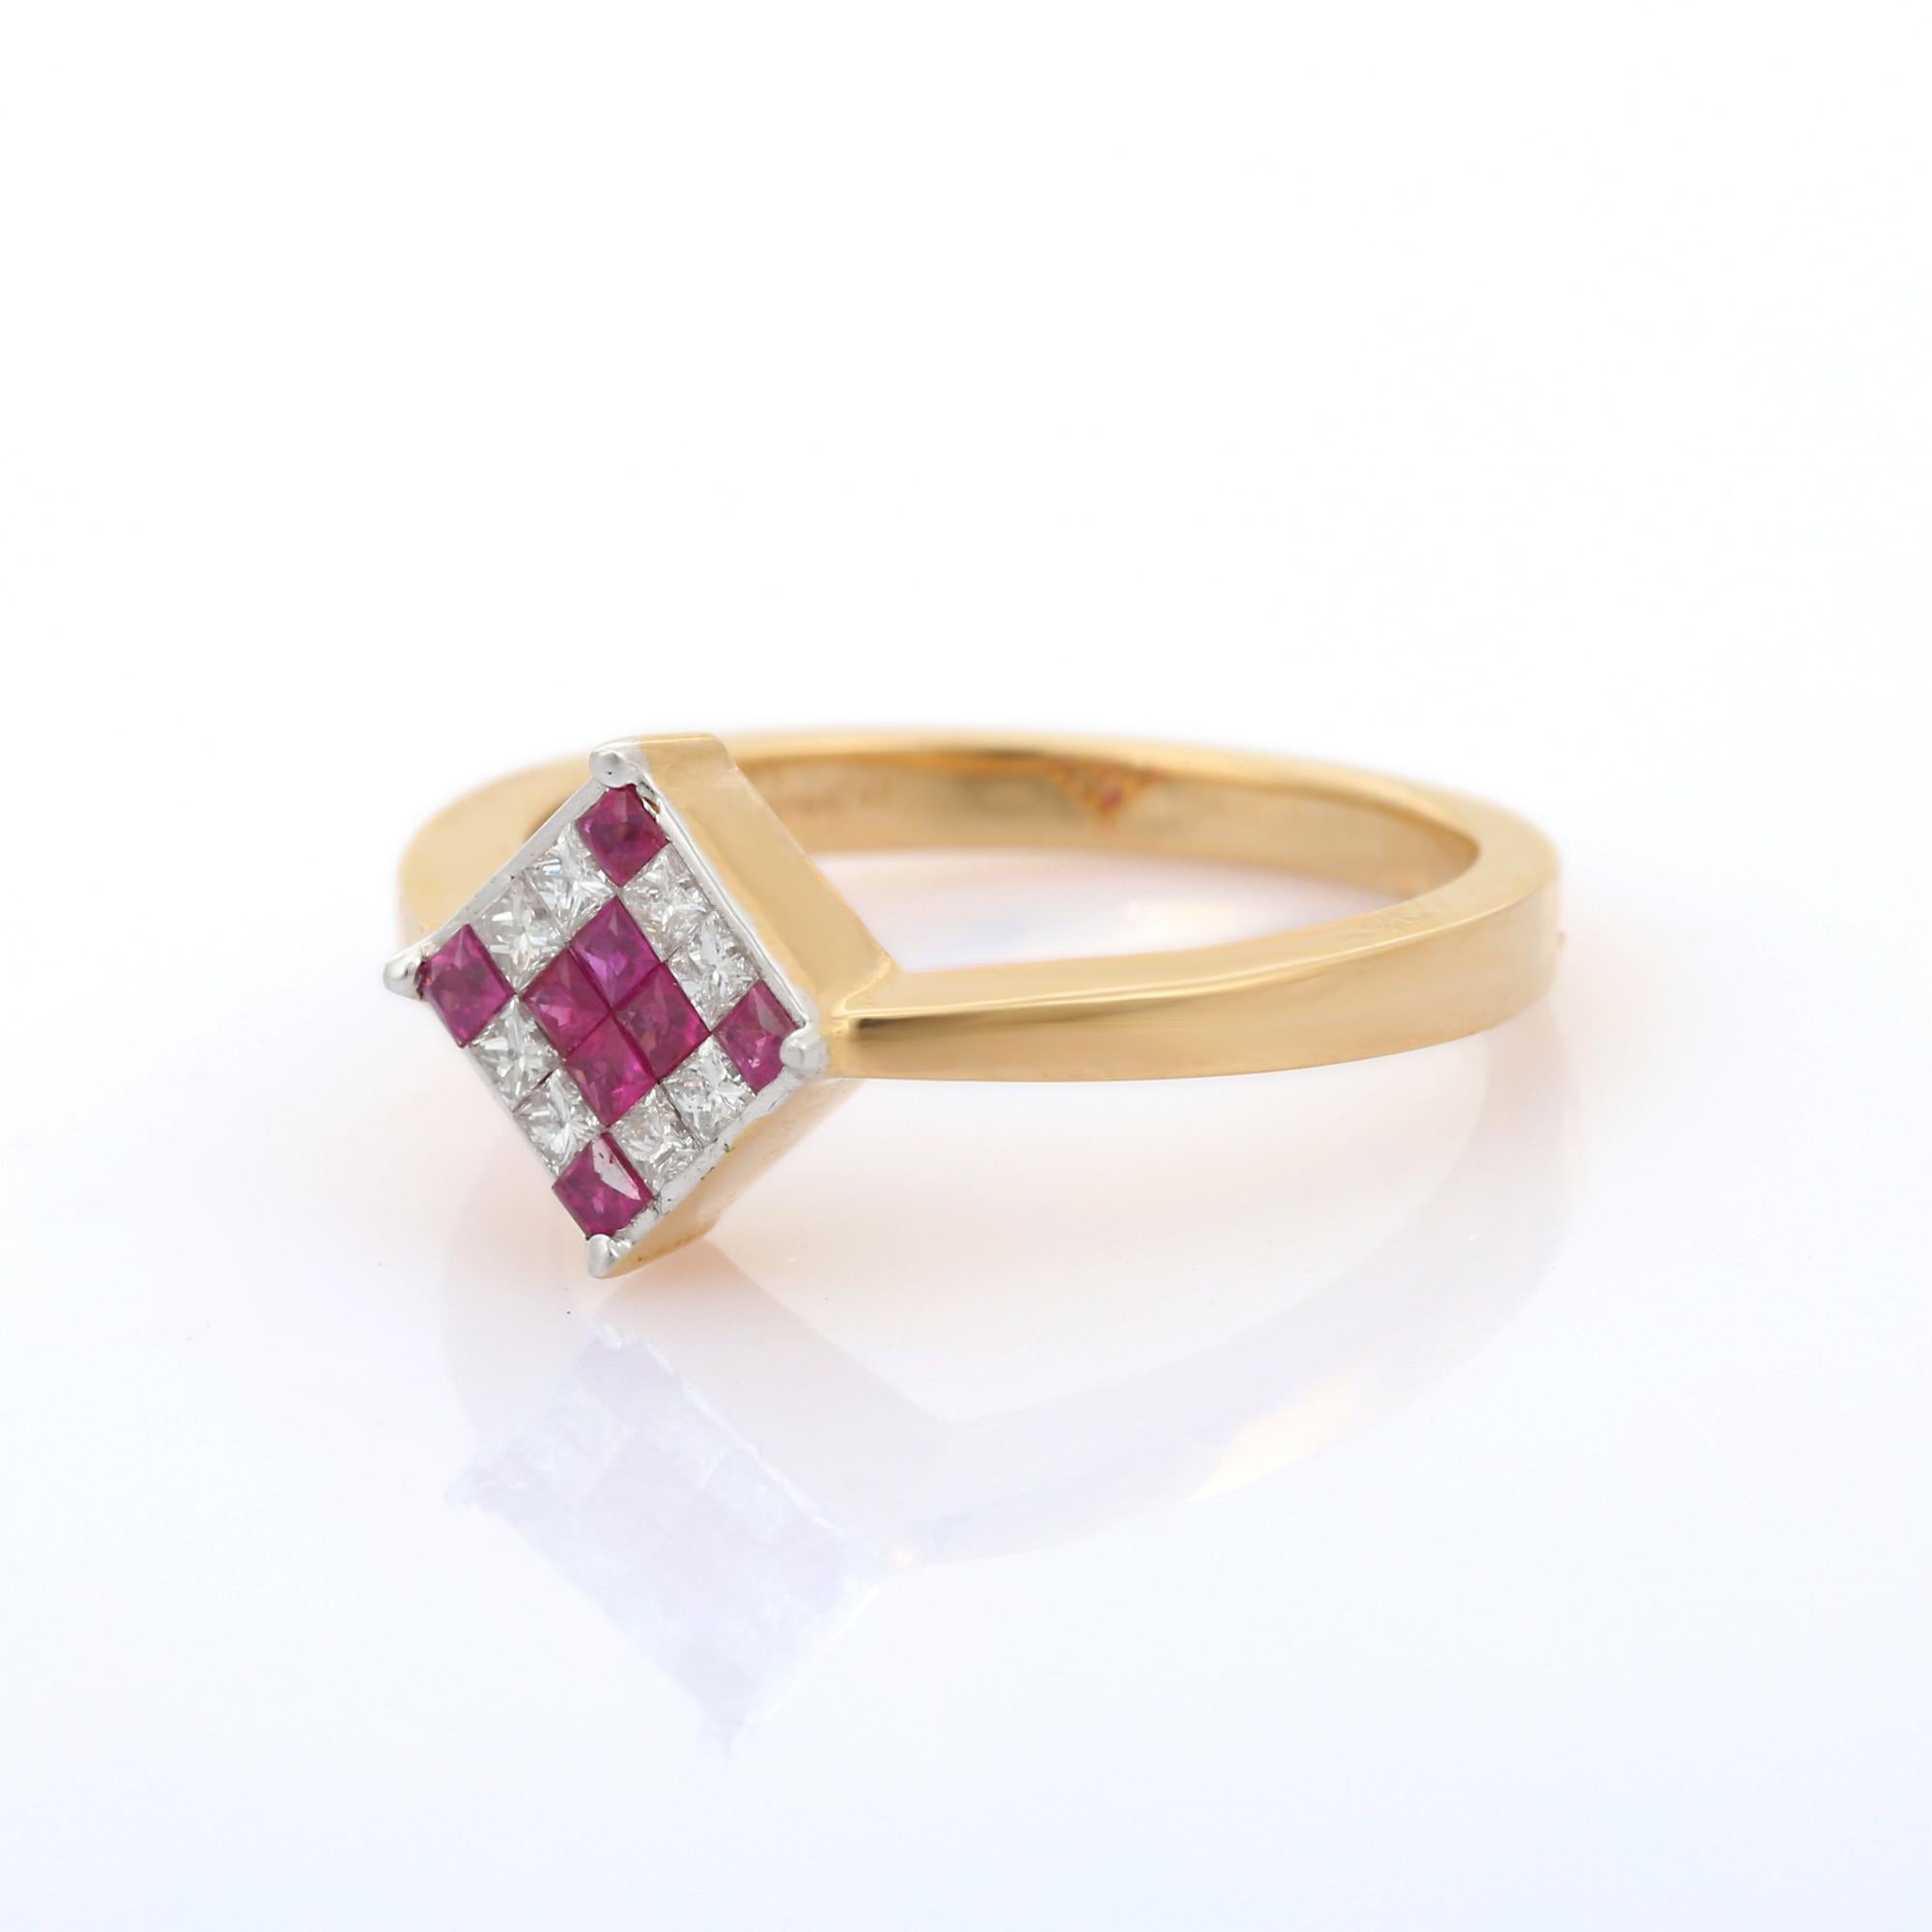 For Sale:  Minimal Mosaic Diamond Ruby Square Stacking Ring in 18K Yellow Gold Settings 4